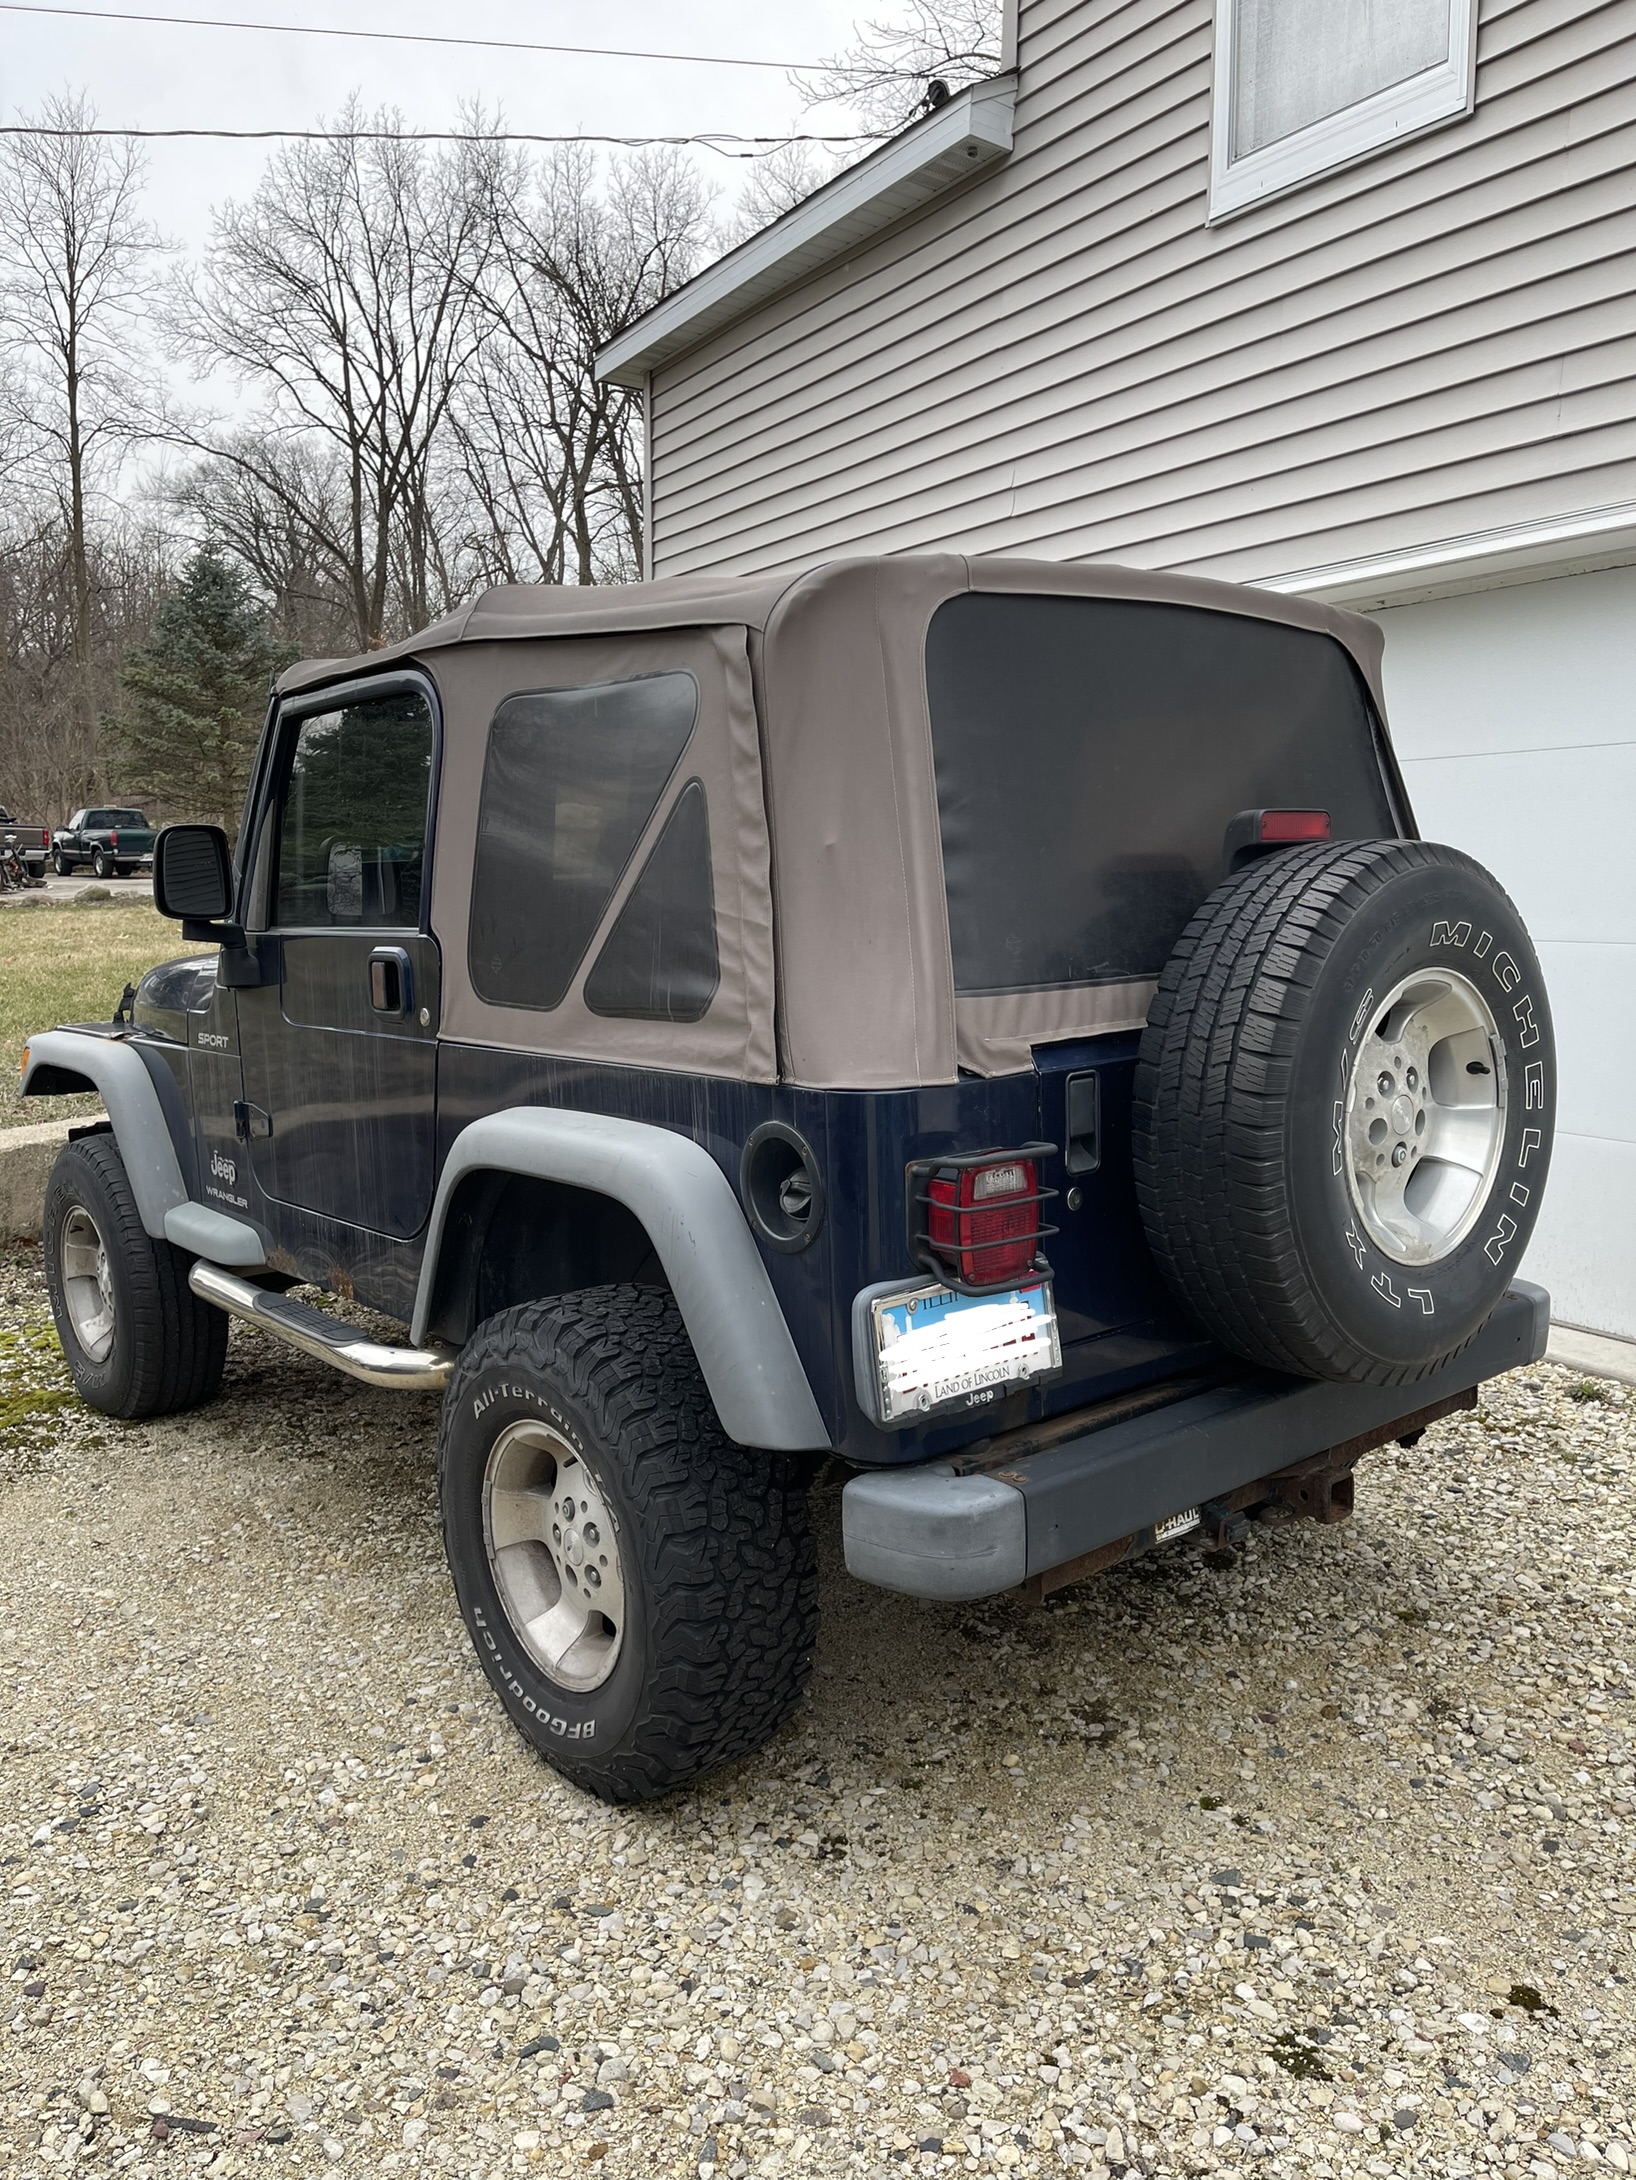 Used Jeep Wrangler for Sale Right Now Under $5,000 - Autotrader